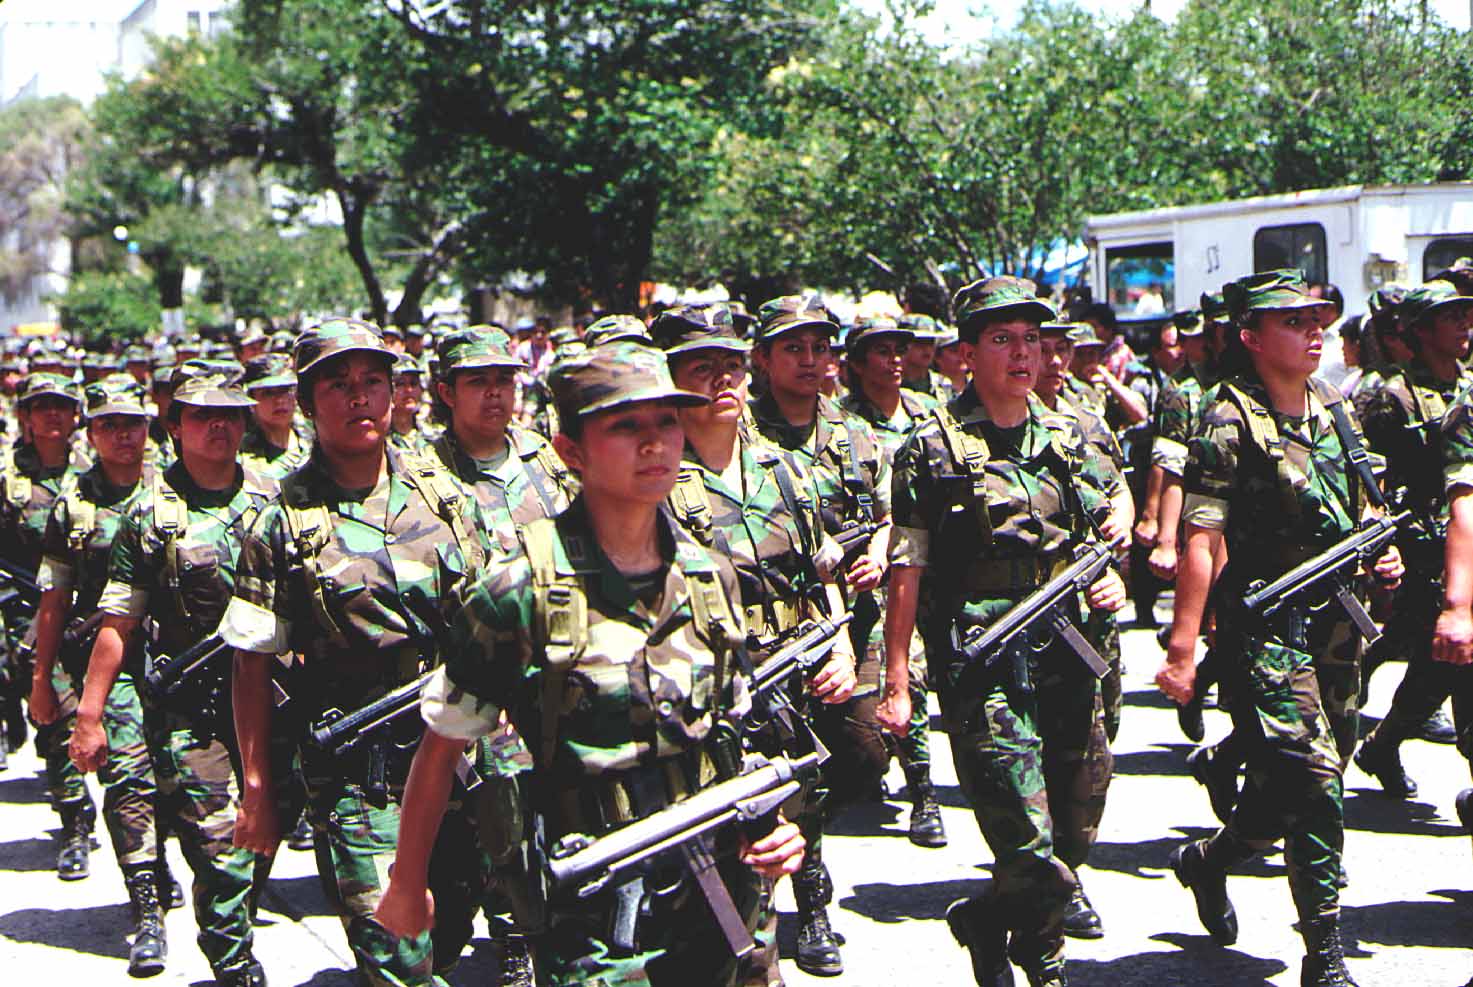 Guatemaltecan Soldiers photo by James Sexton.